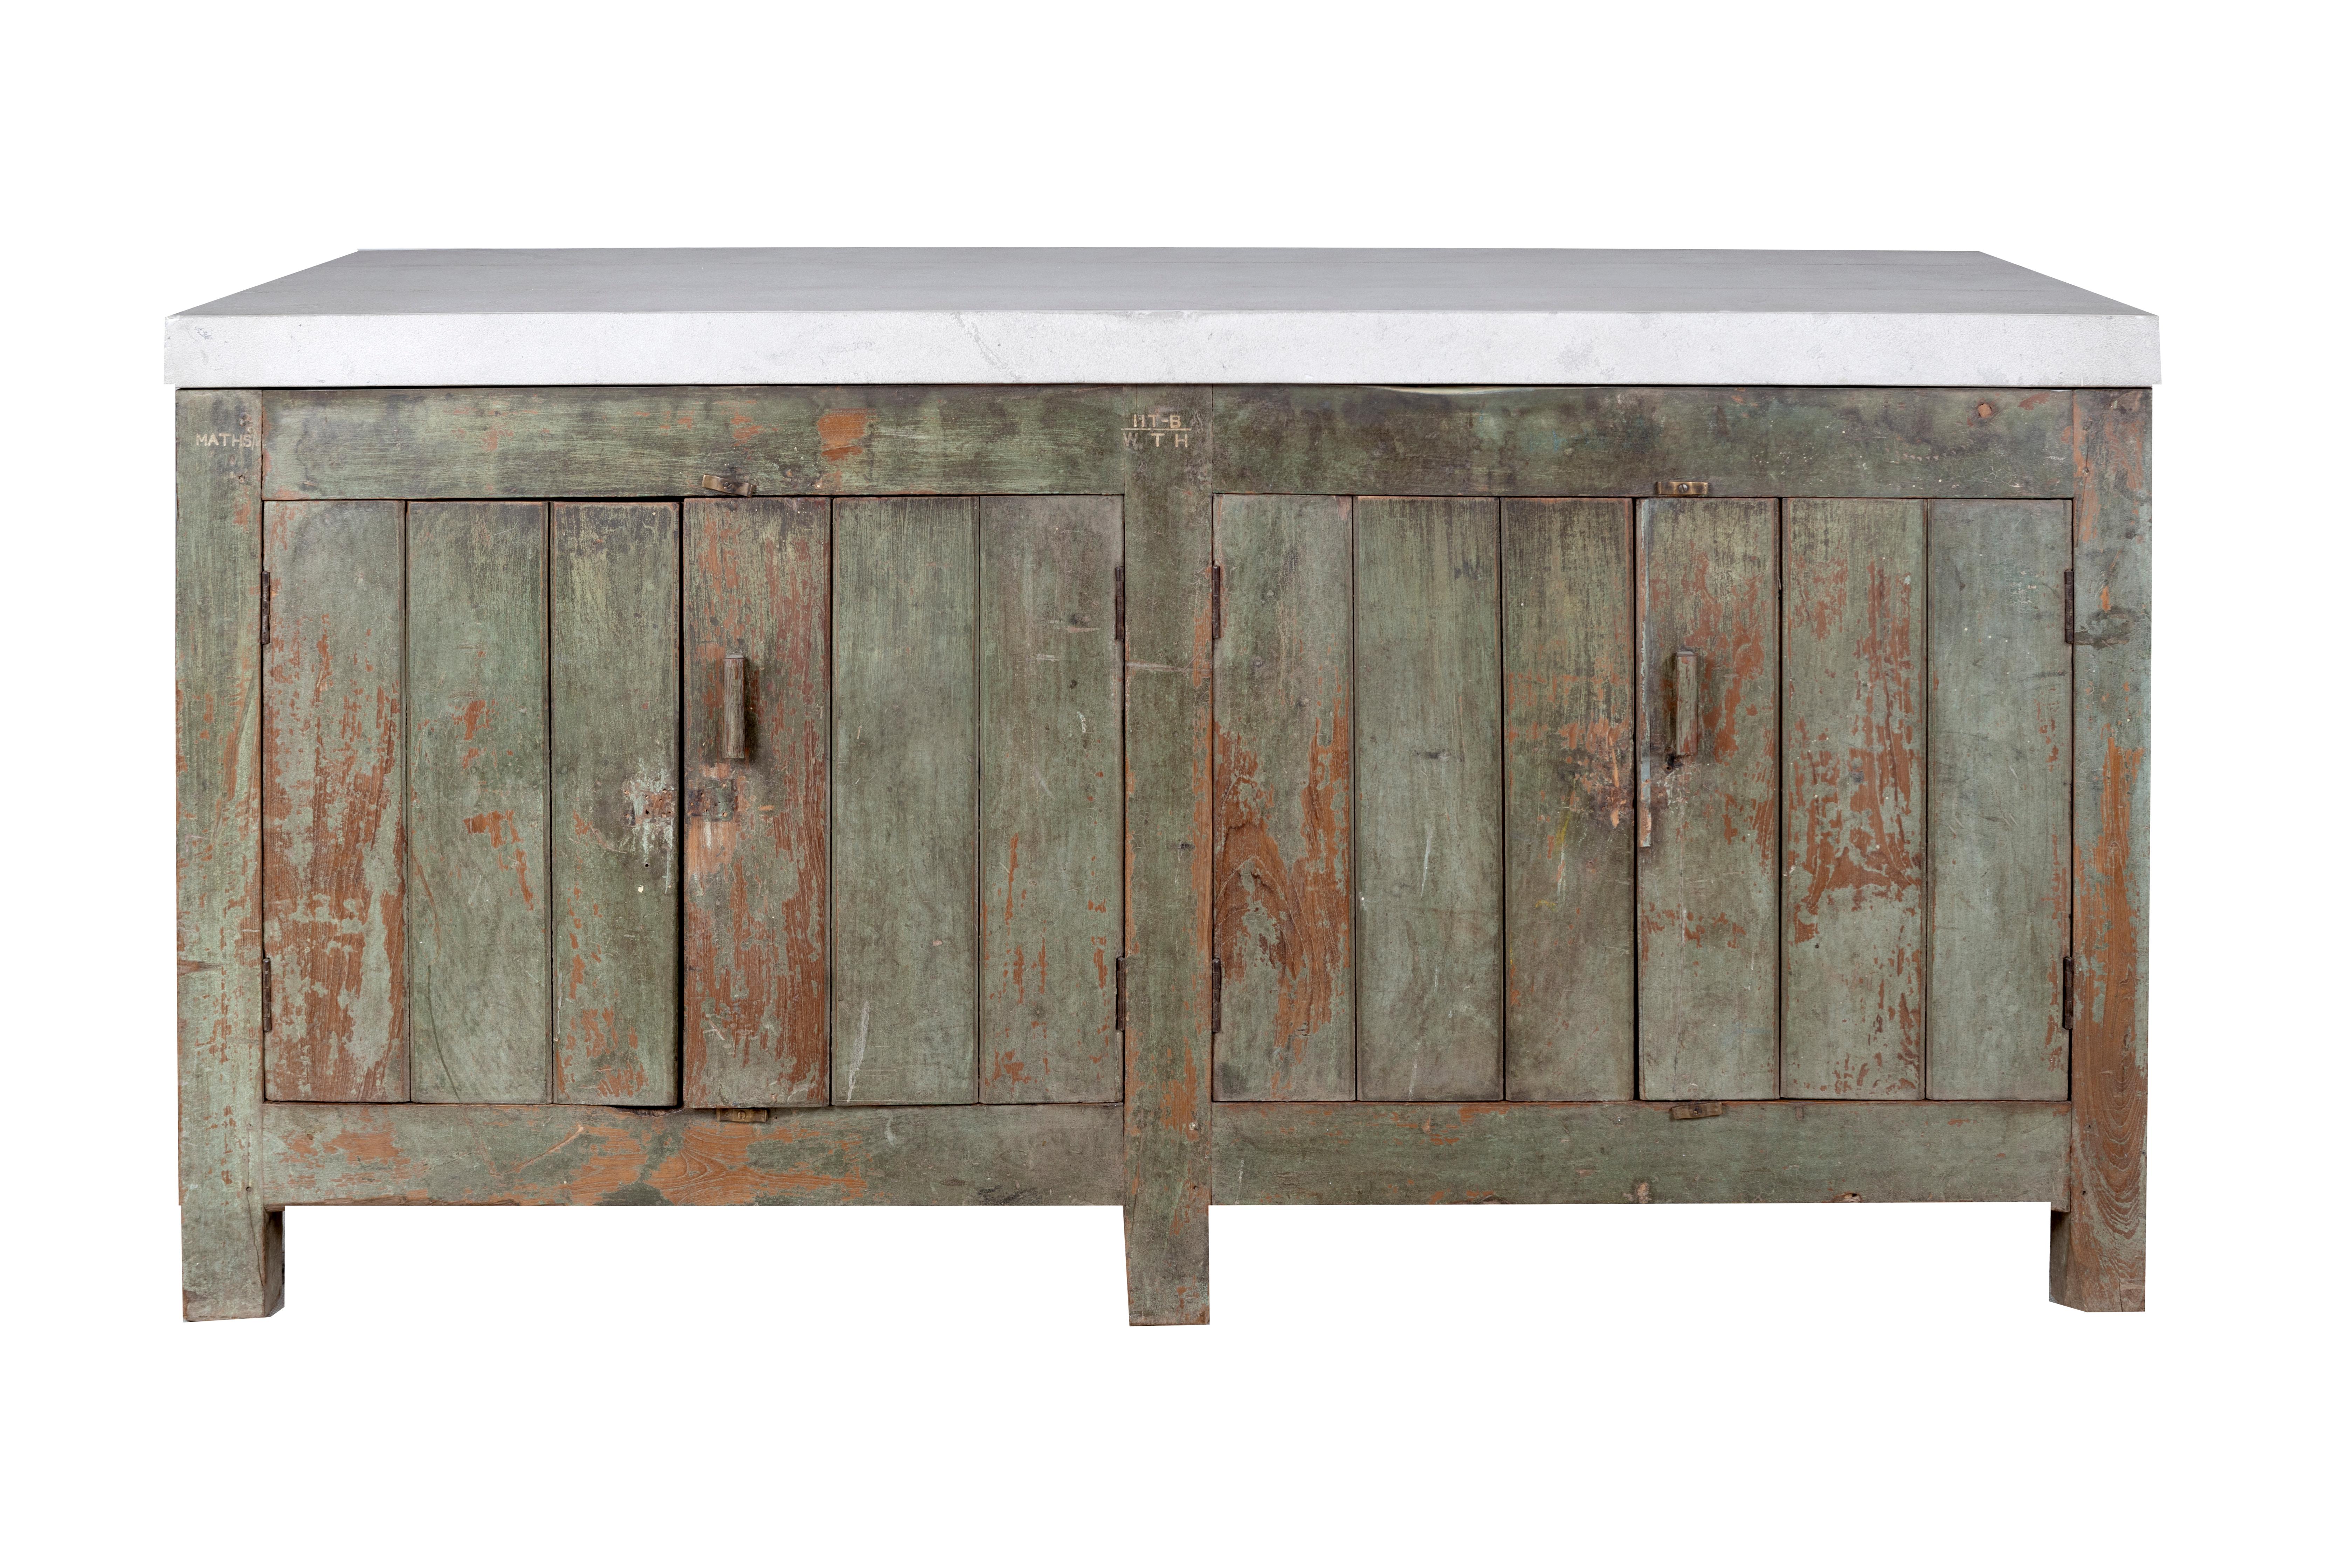 This vintage, distressed French tradesman’s cabinet has a limestone top with storage space inside. With its mid-century, organic modern design, this beautiful piece would be perfect at home in a dining room as a sideboard or as a bar or buffet in